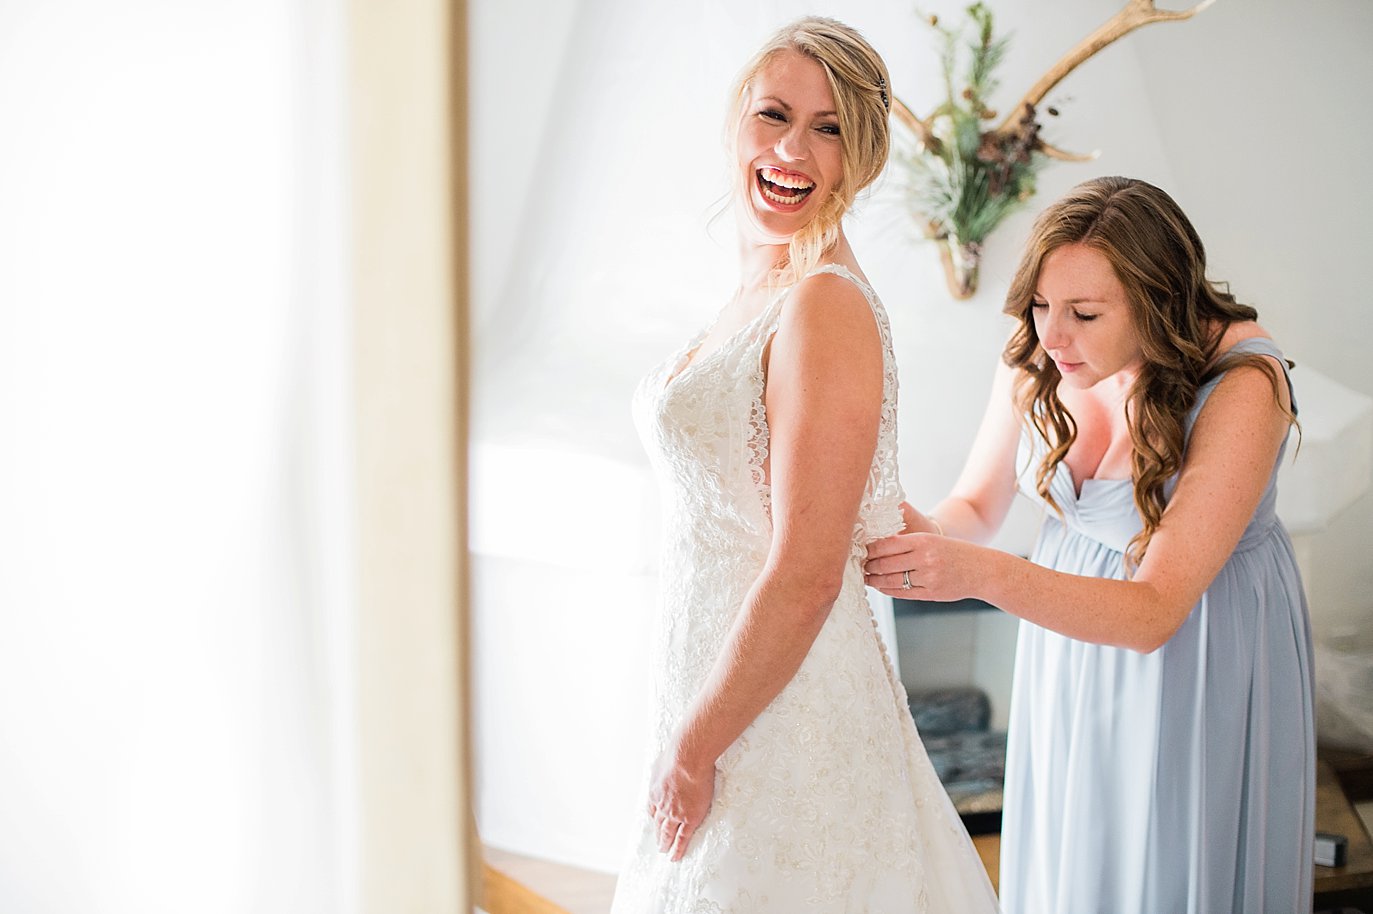 Bride getting dressed at Sonnenalp Hotel by Vail wedding photographer Jennie Crate